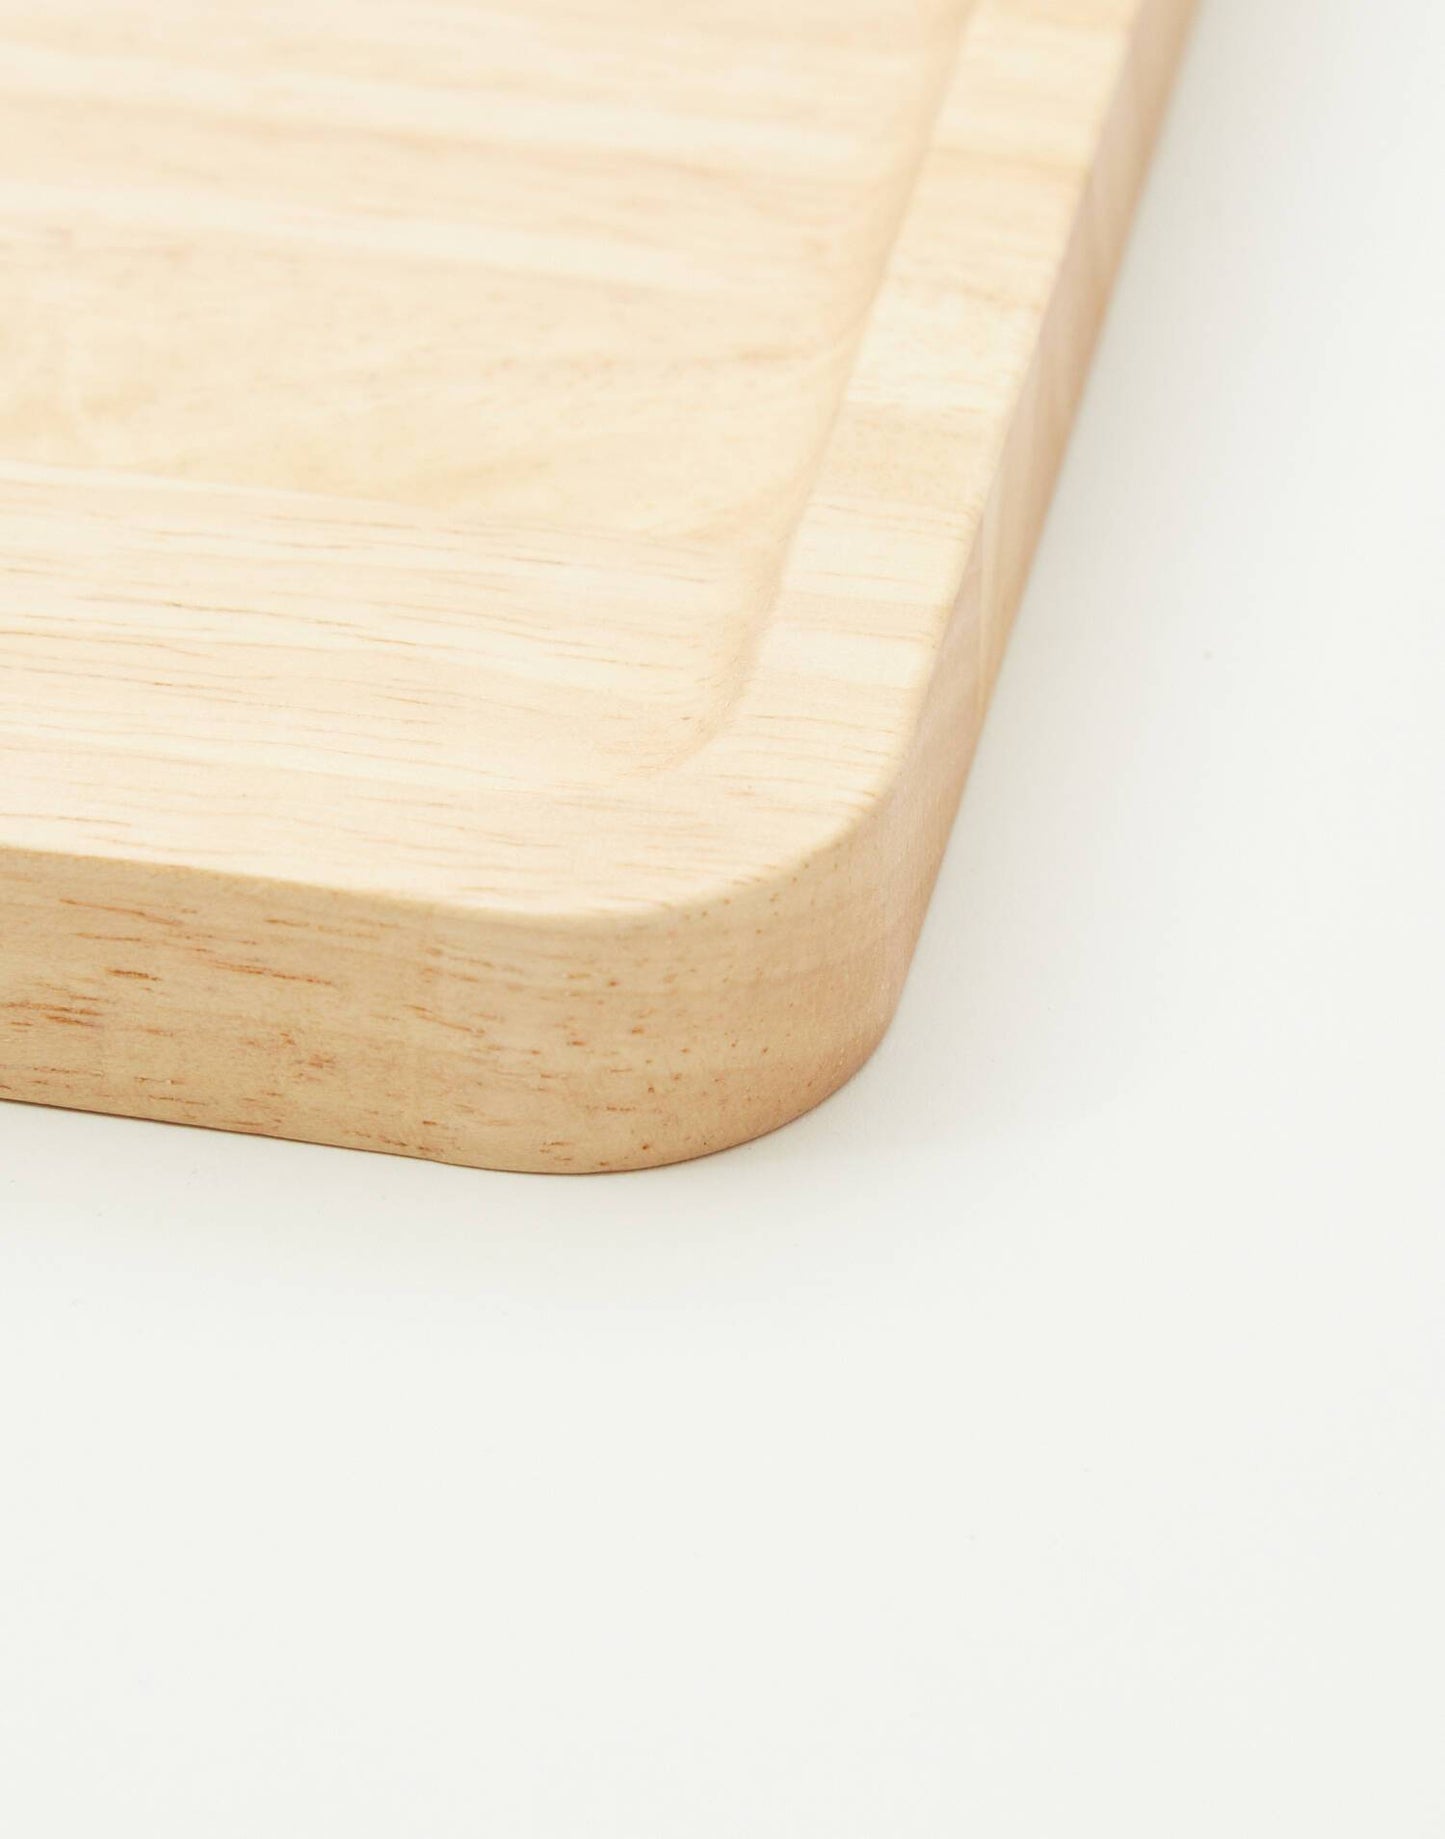 Square wood tray